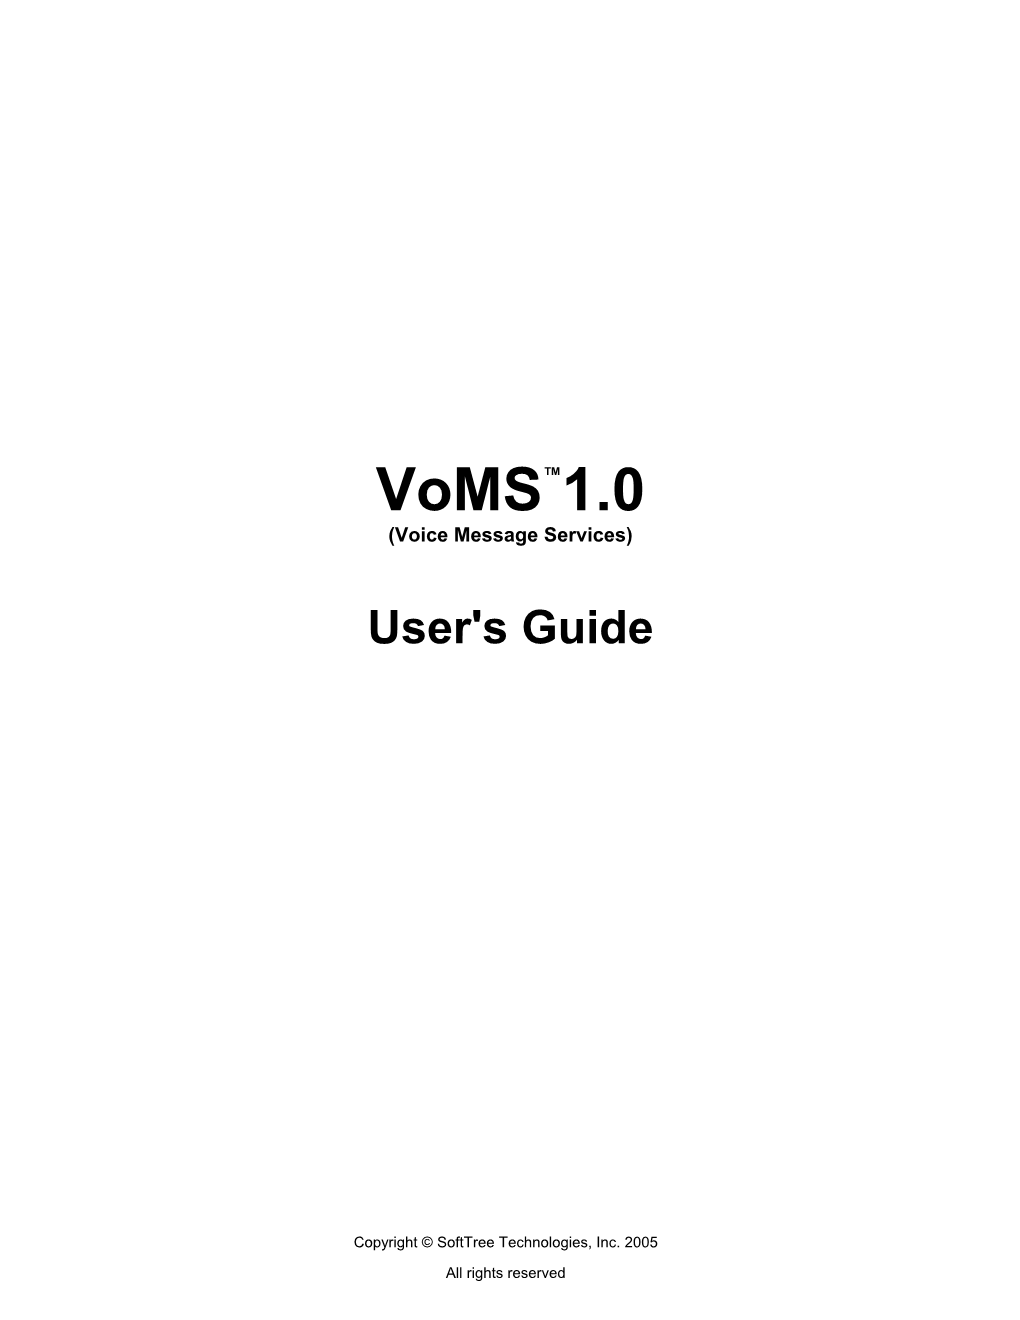 Voms User's Guide